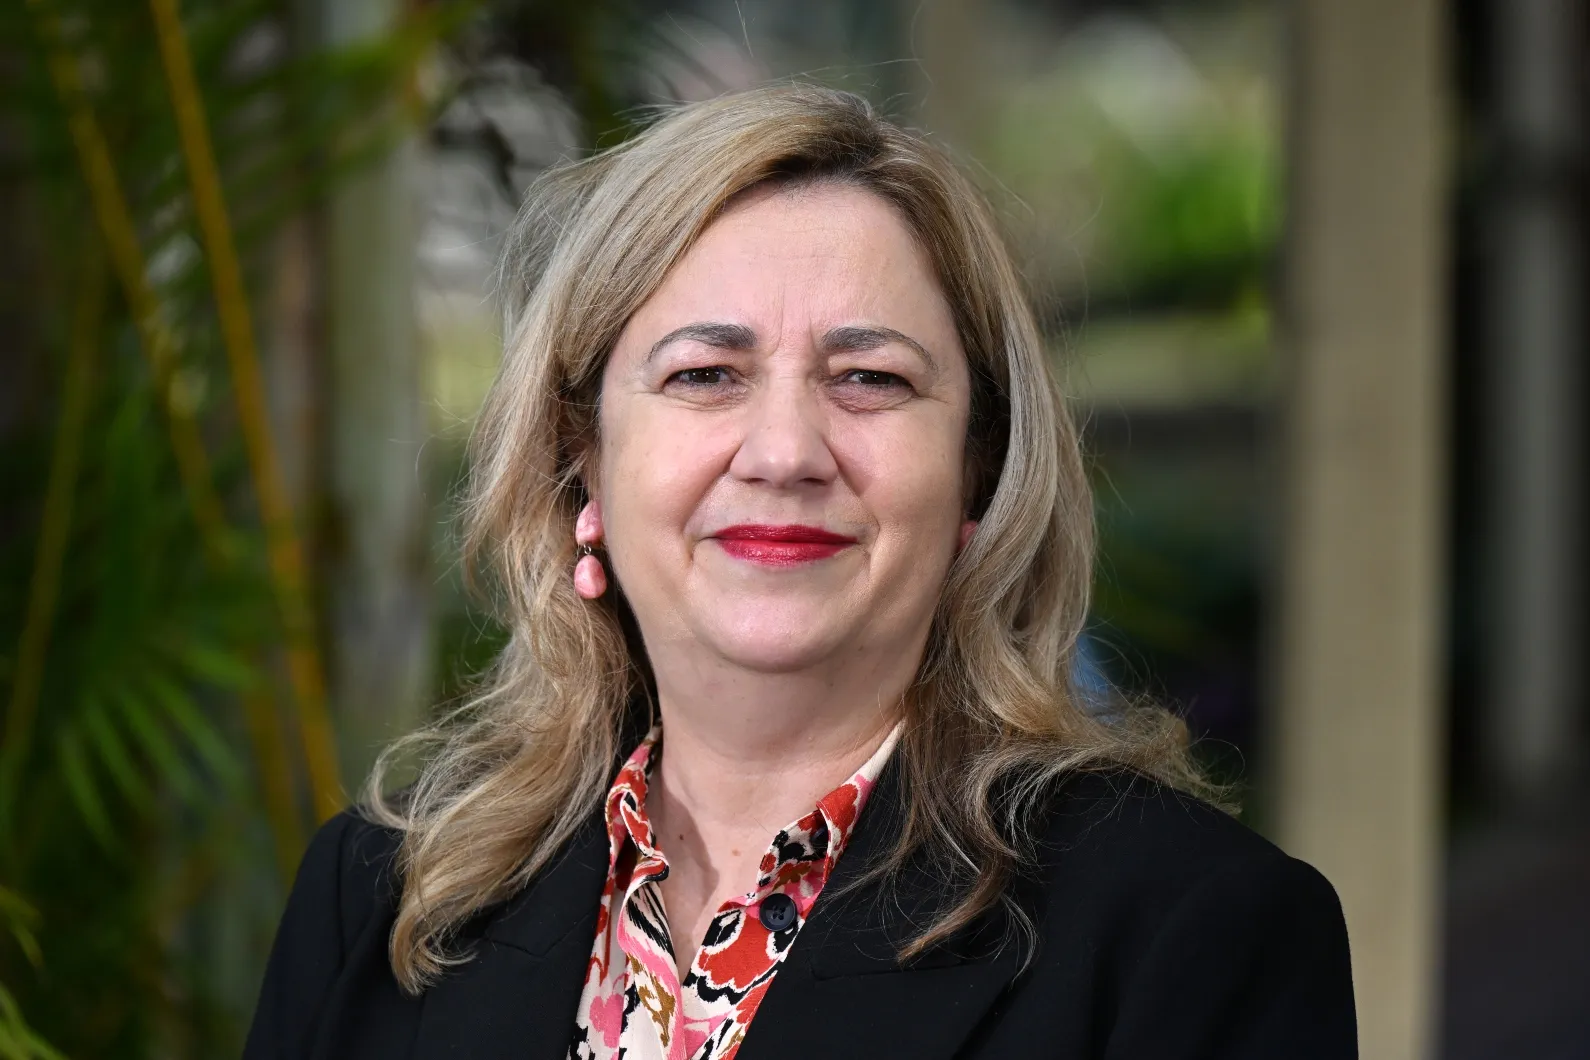 Annastacia Palaszczuk’s Biography, Nationality, Age, Properties, Weight, Height, Records, Lifestyle, and Hobbies